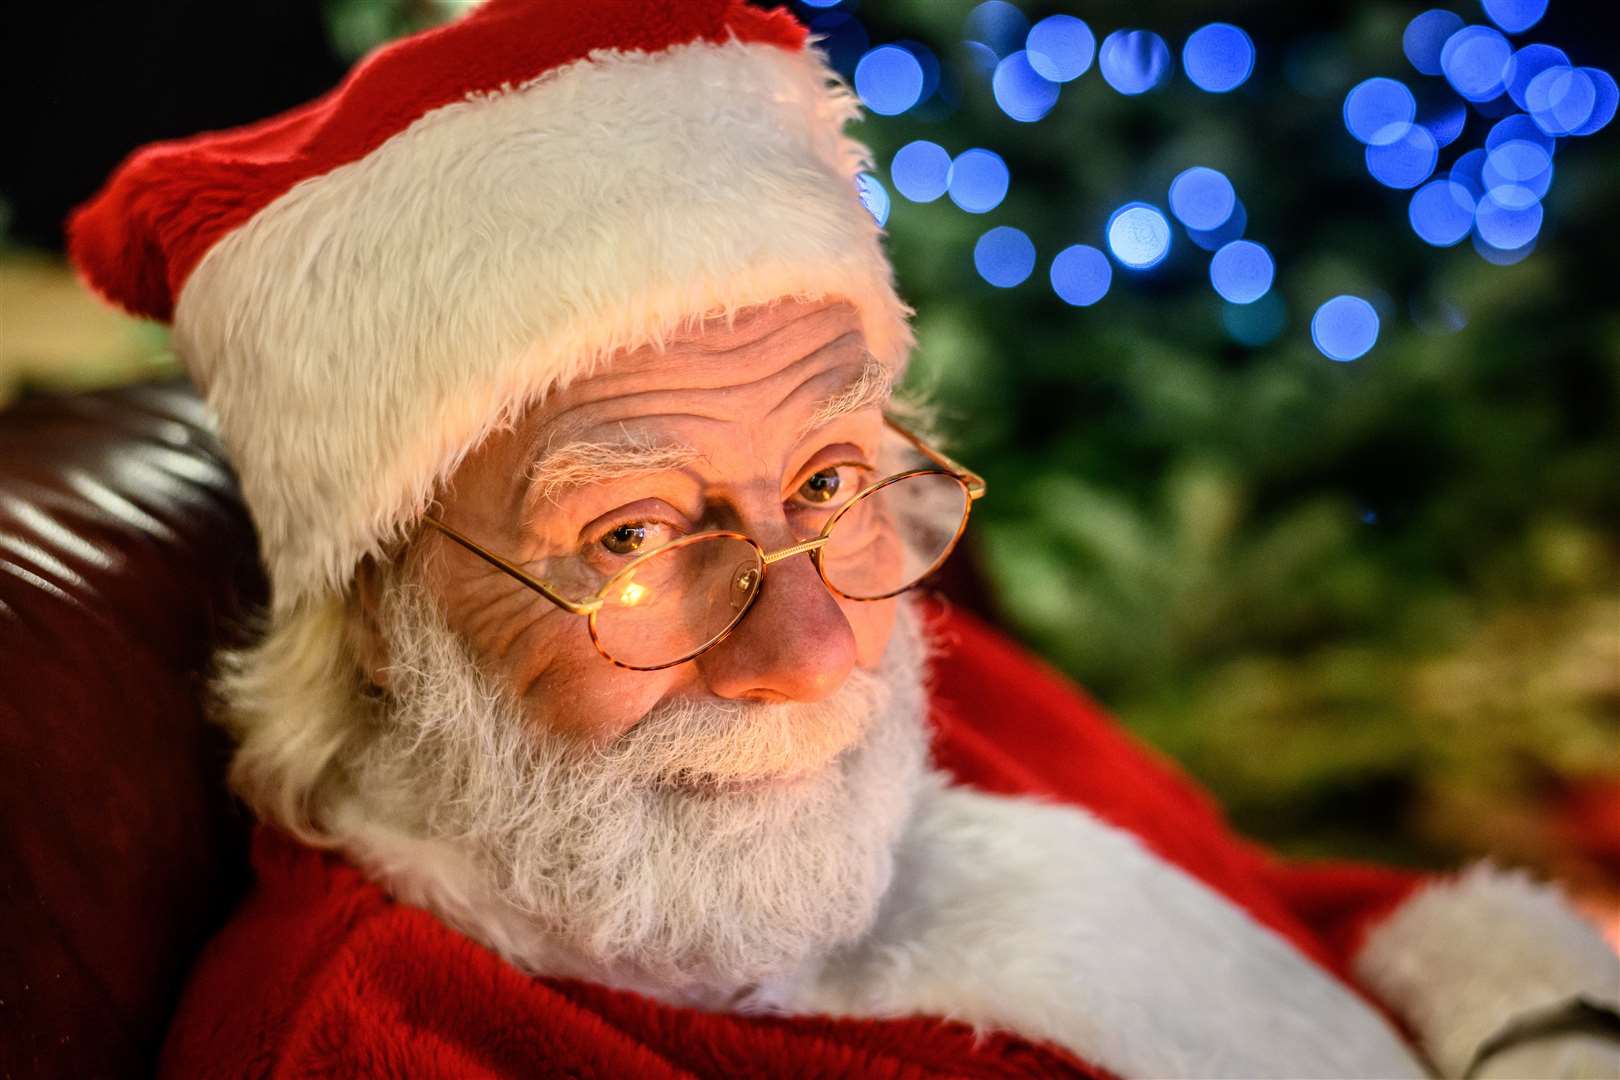 Will you catch sight of Father Christmas?